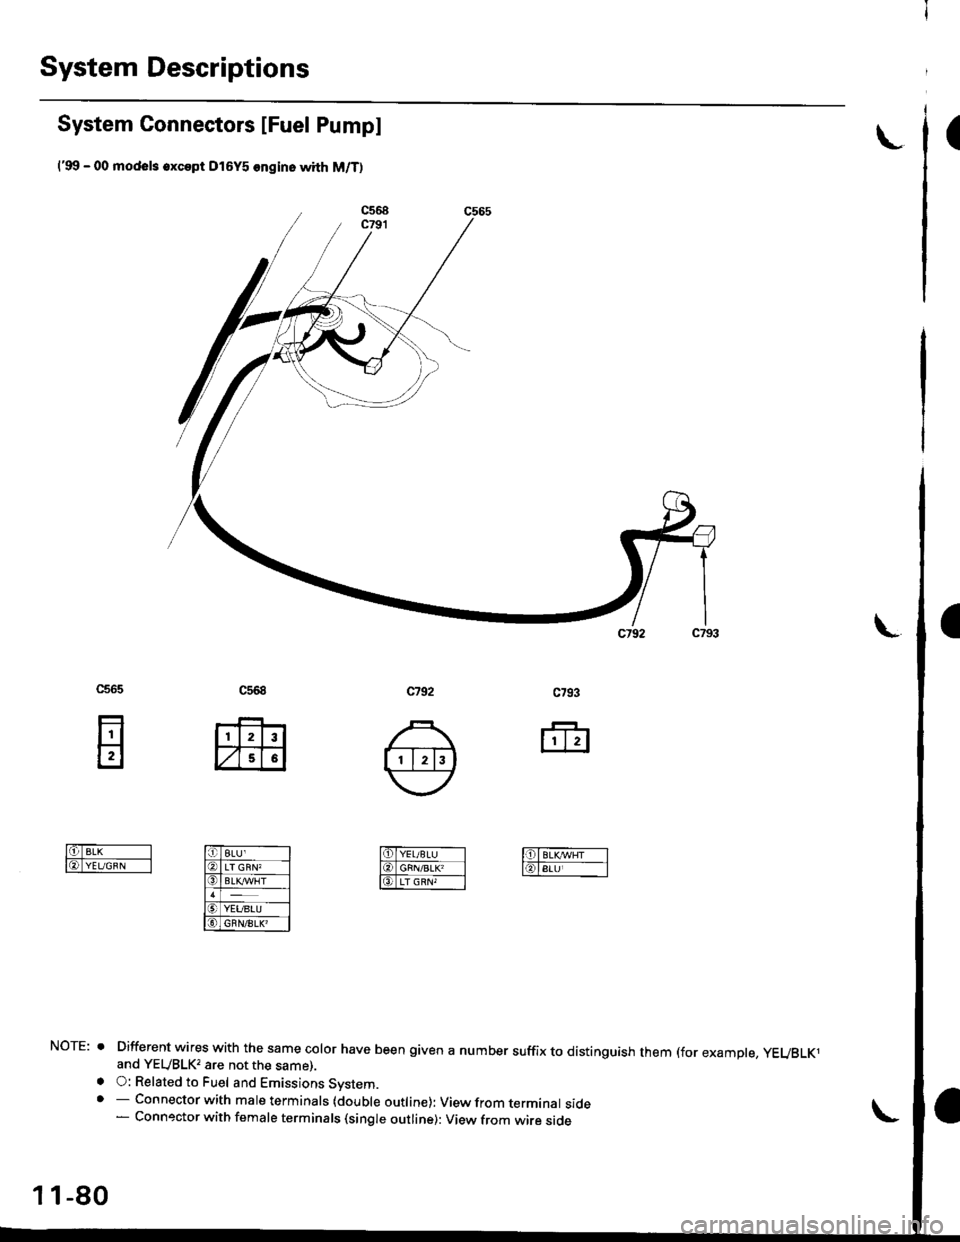 HONDA CIVIC 1996 6.G User Guide System Descriptions
System Connectors lFuel Pump]
(9!, - 00 models 6xcept Dl6Y5 ongino with M/T)
\(
I
c568
ffi
c565
E
c792
Different wires with the same color have been given a number suffix to disti